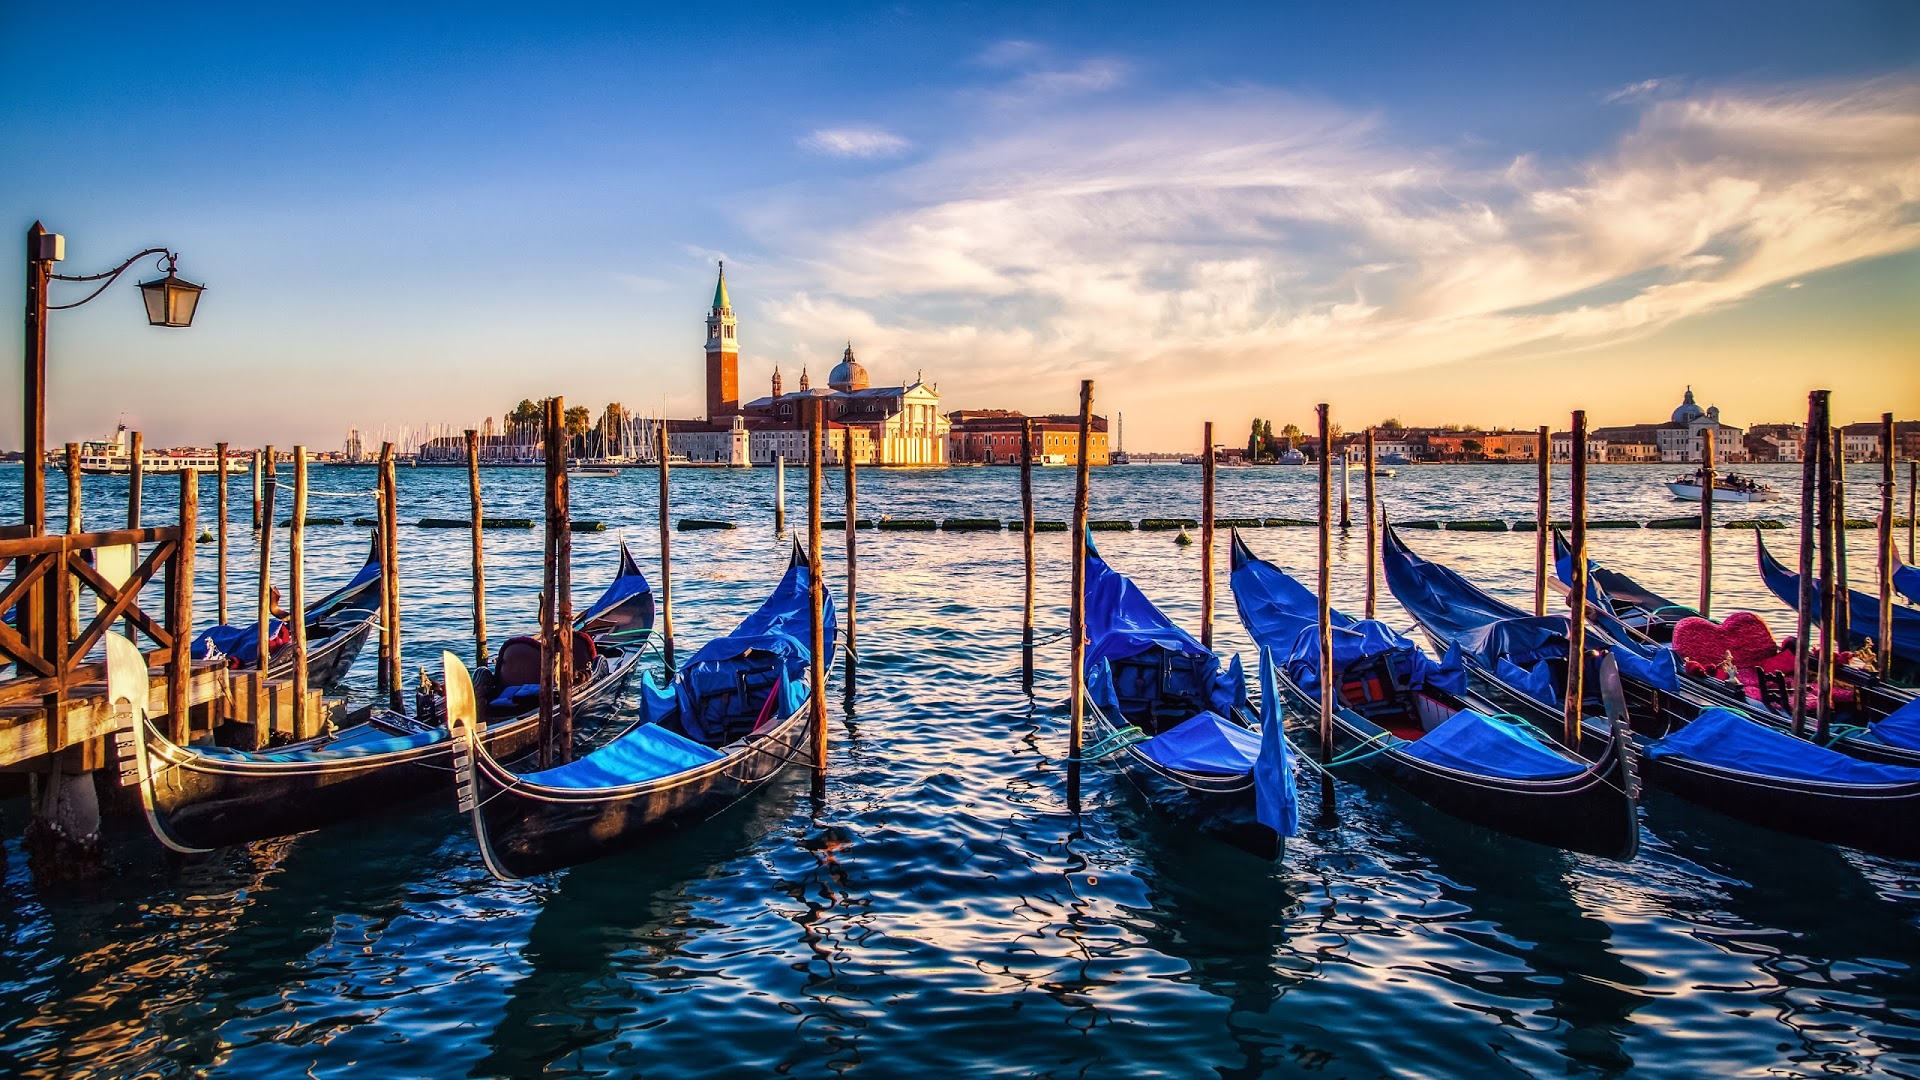 General 1920x1080 Venice gondolas sunset Italy clouds water vehicle